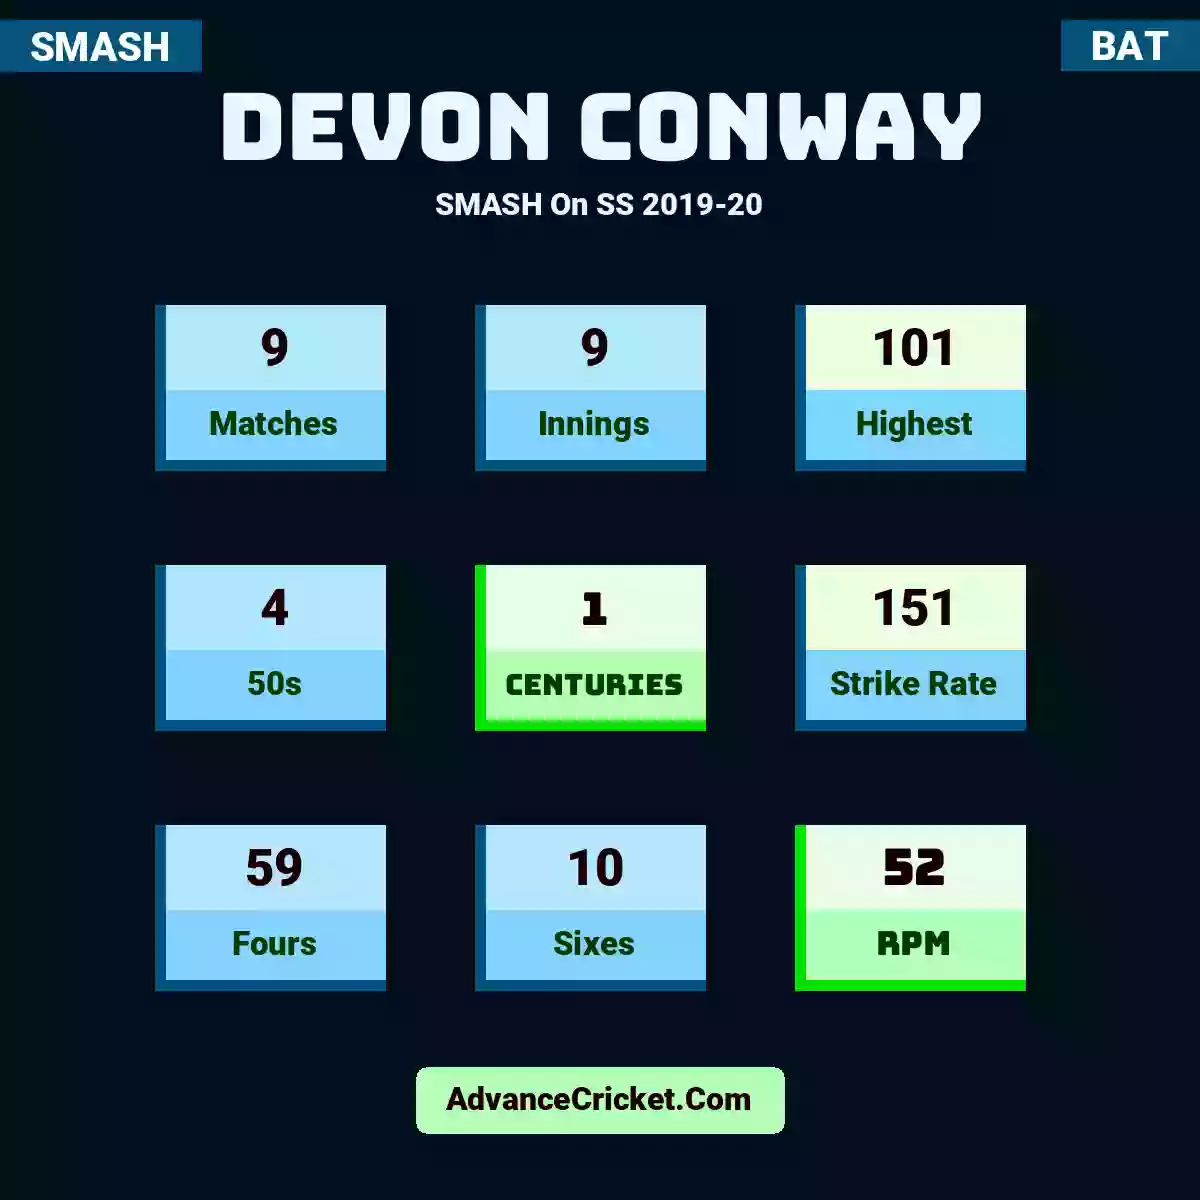 Devon Conway SMASH  On SS 2019-20, Devon Conway played 9 matches, scored 101 runs as highest, 4 half-centuries, and 1 centuries, with a strike rate of 151. D.Conway hit 59 fours and 10 sixes, with an RPM of 52.